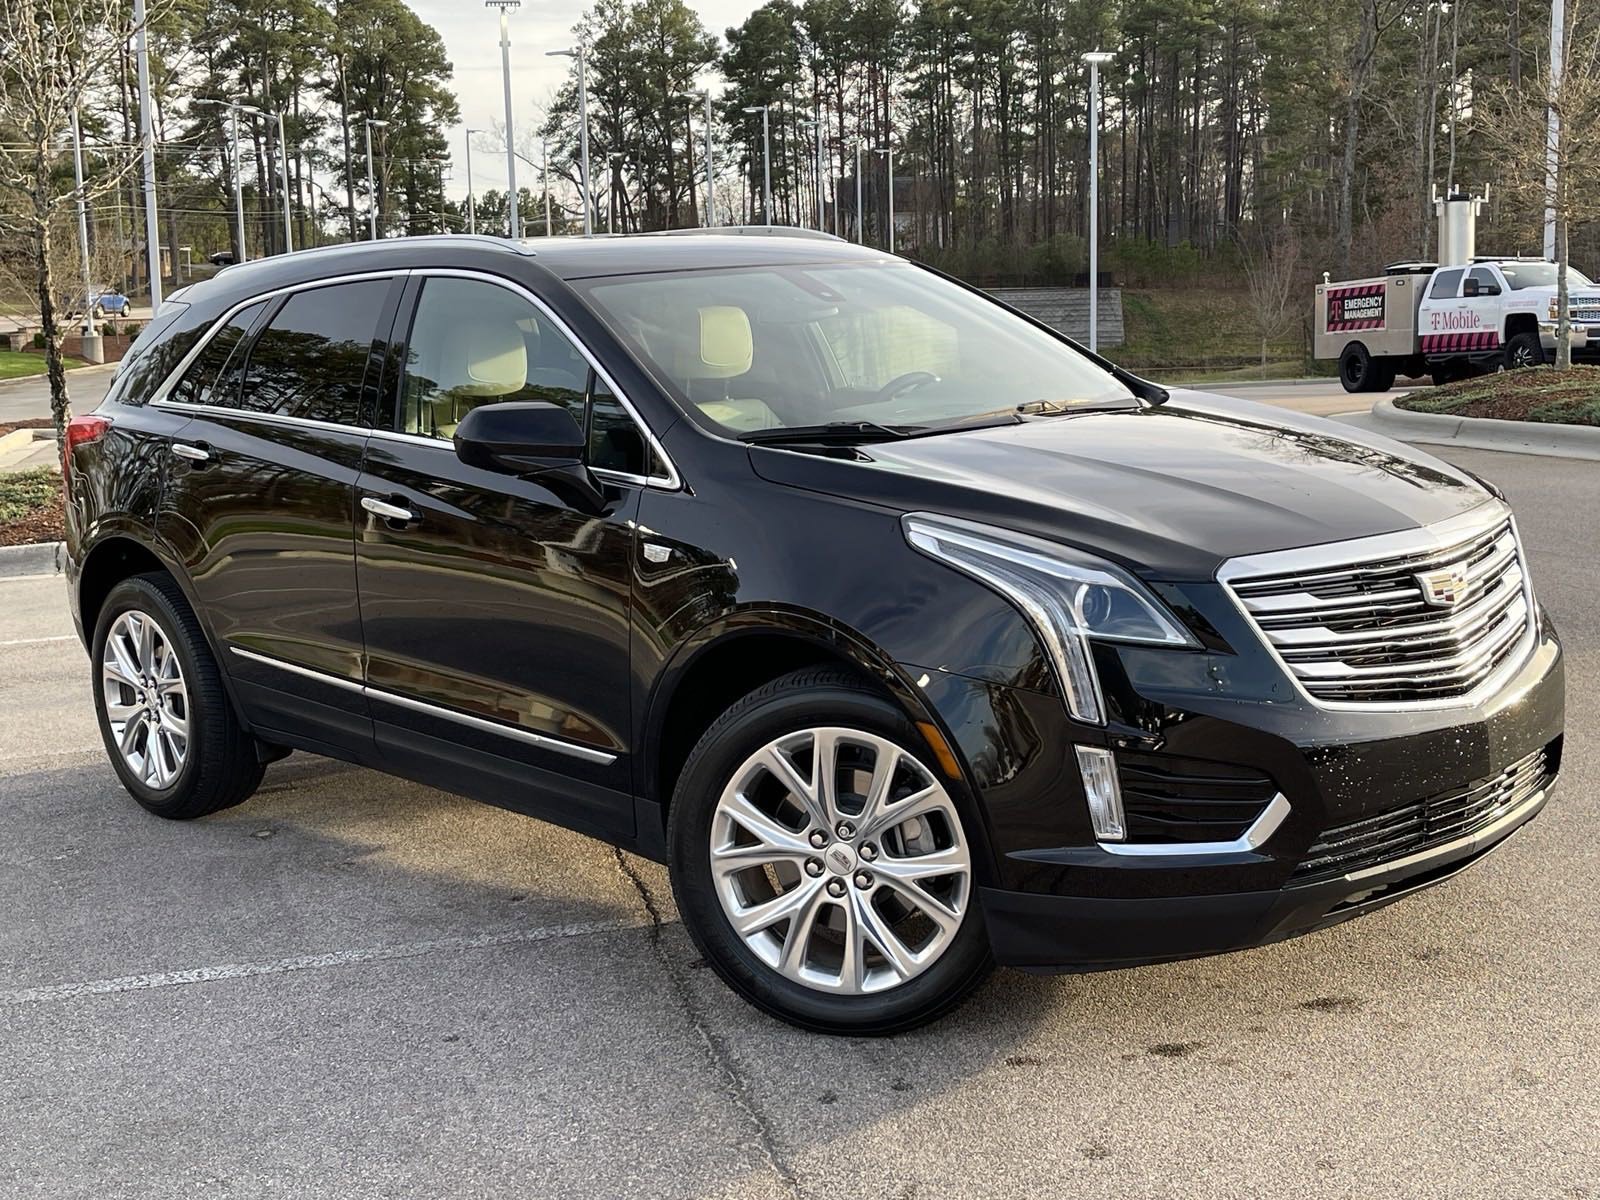 Certified Pre-Owned 2019 Cadillac XT5 3.6L XT5 FWD SUV in Durham #Q21397A |  Hendrick Cadillac Southpoint